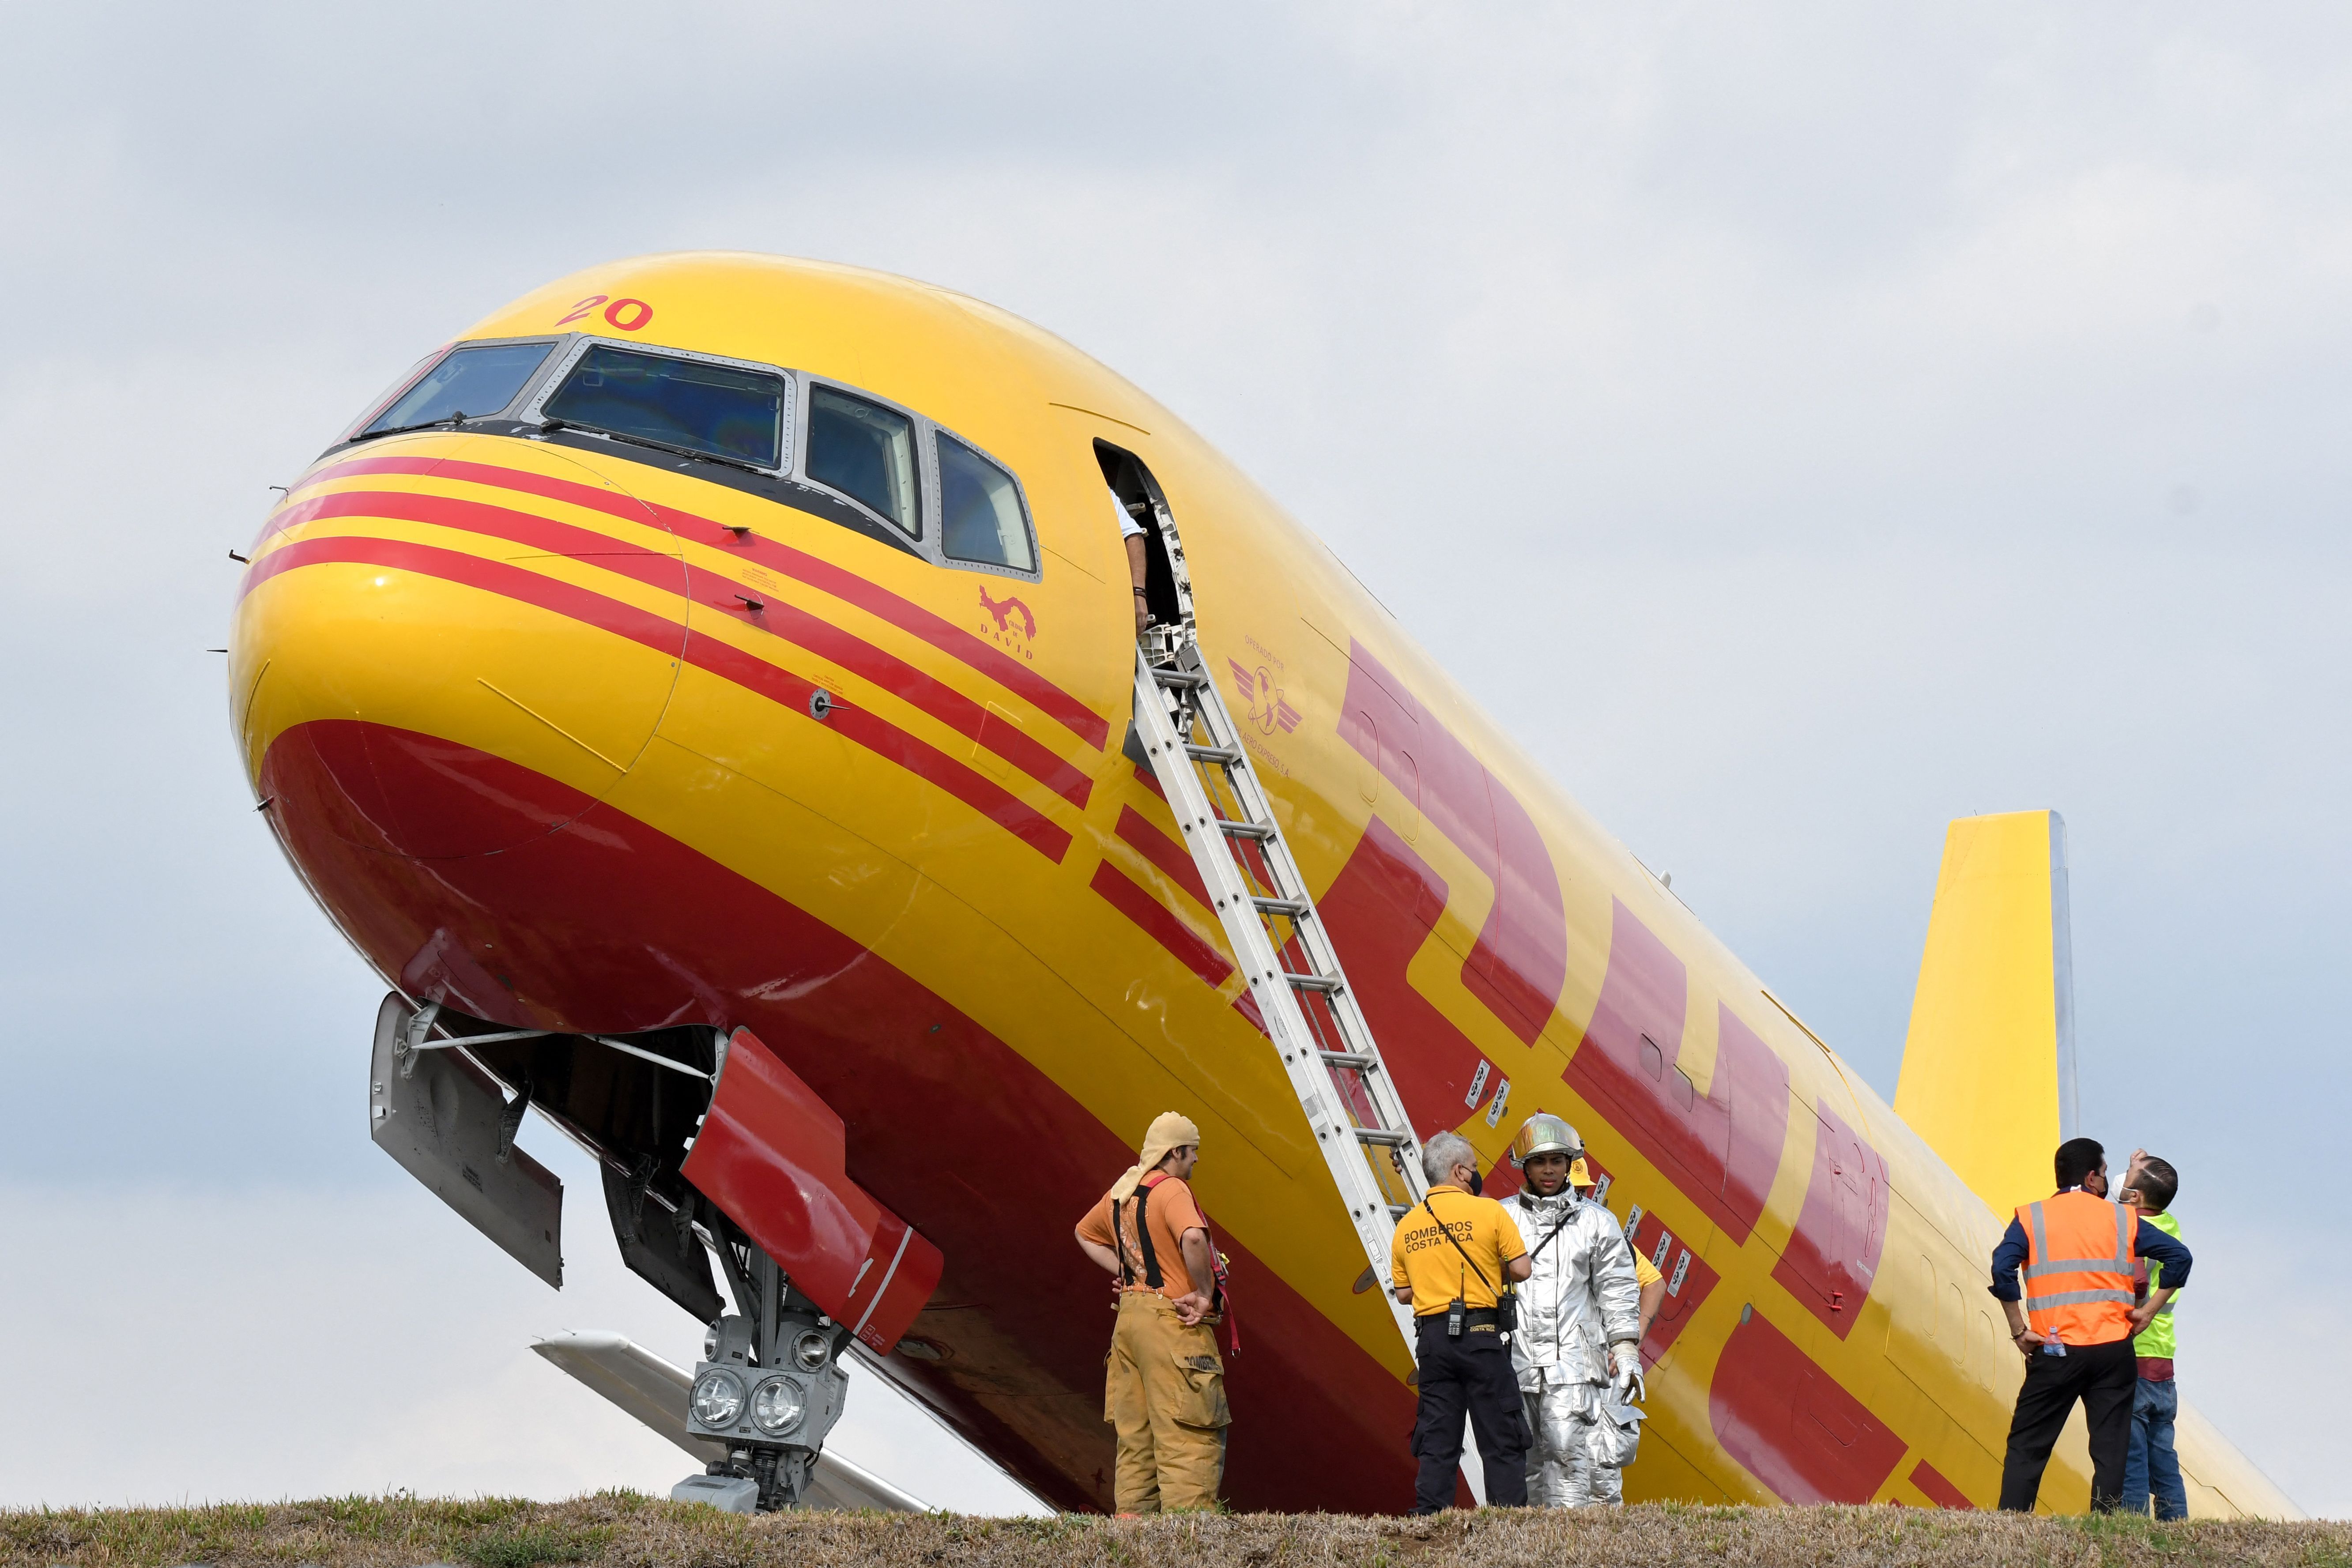 A DHL aircraft suffered an accident in San José Costa Rica. 